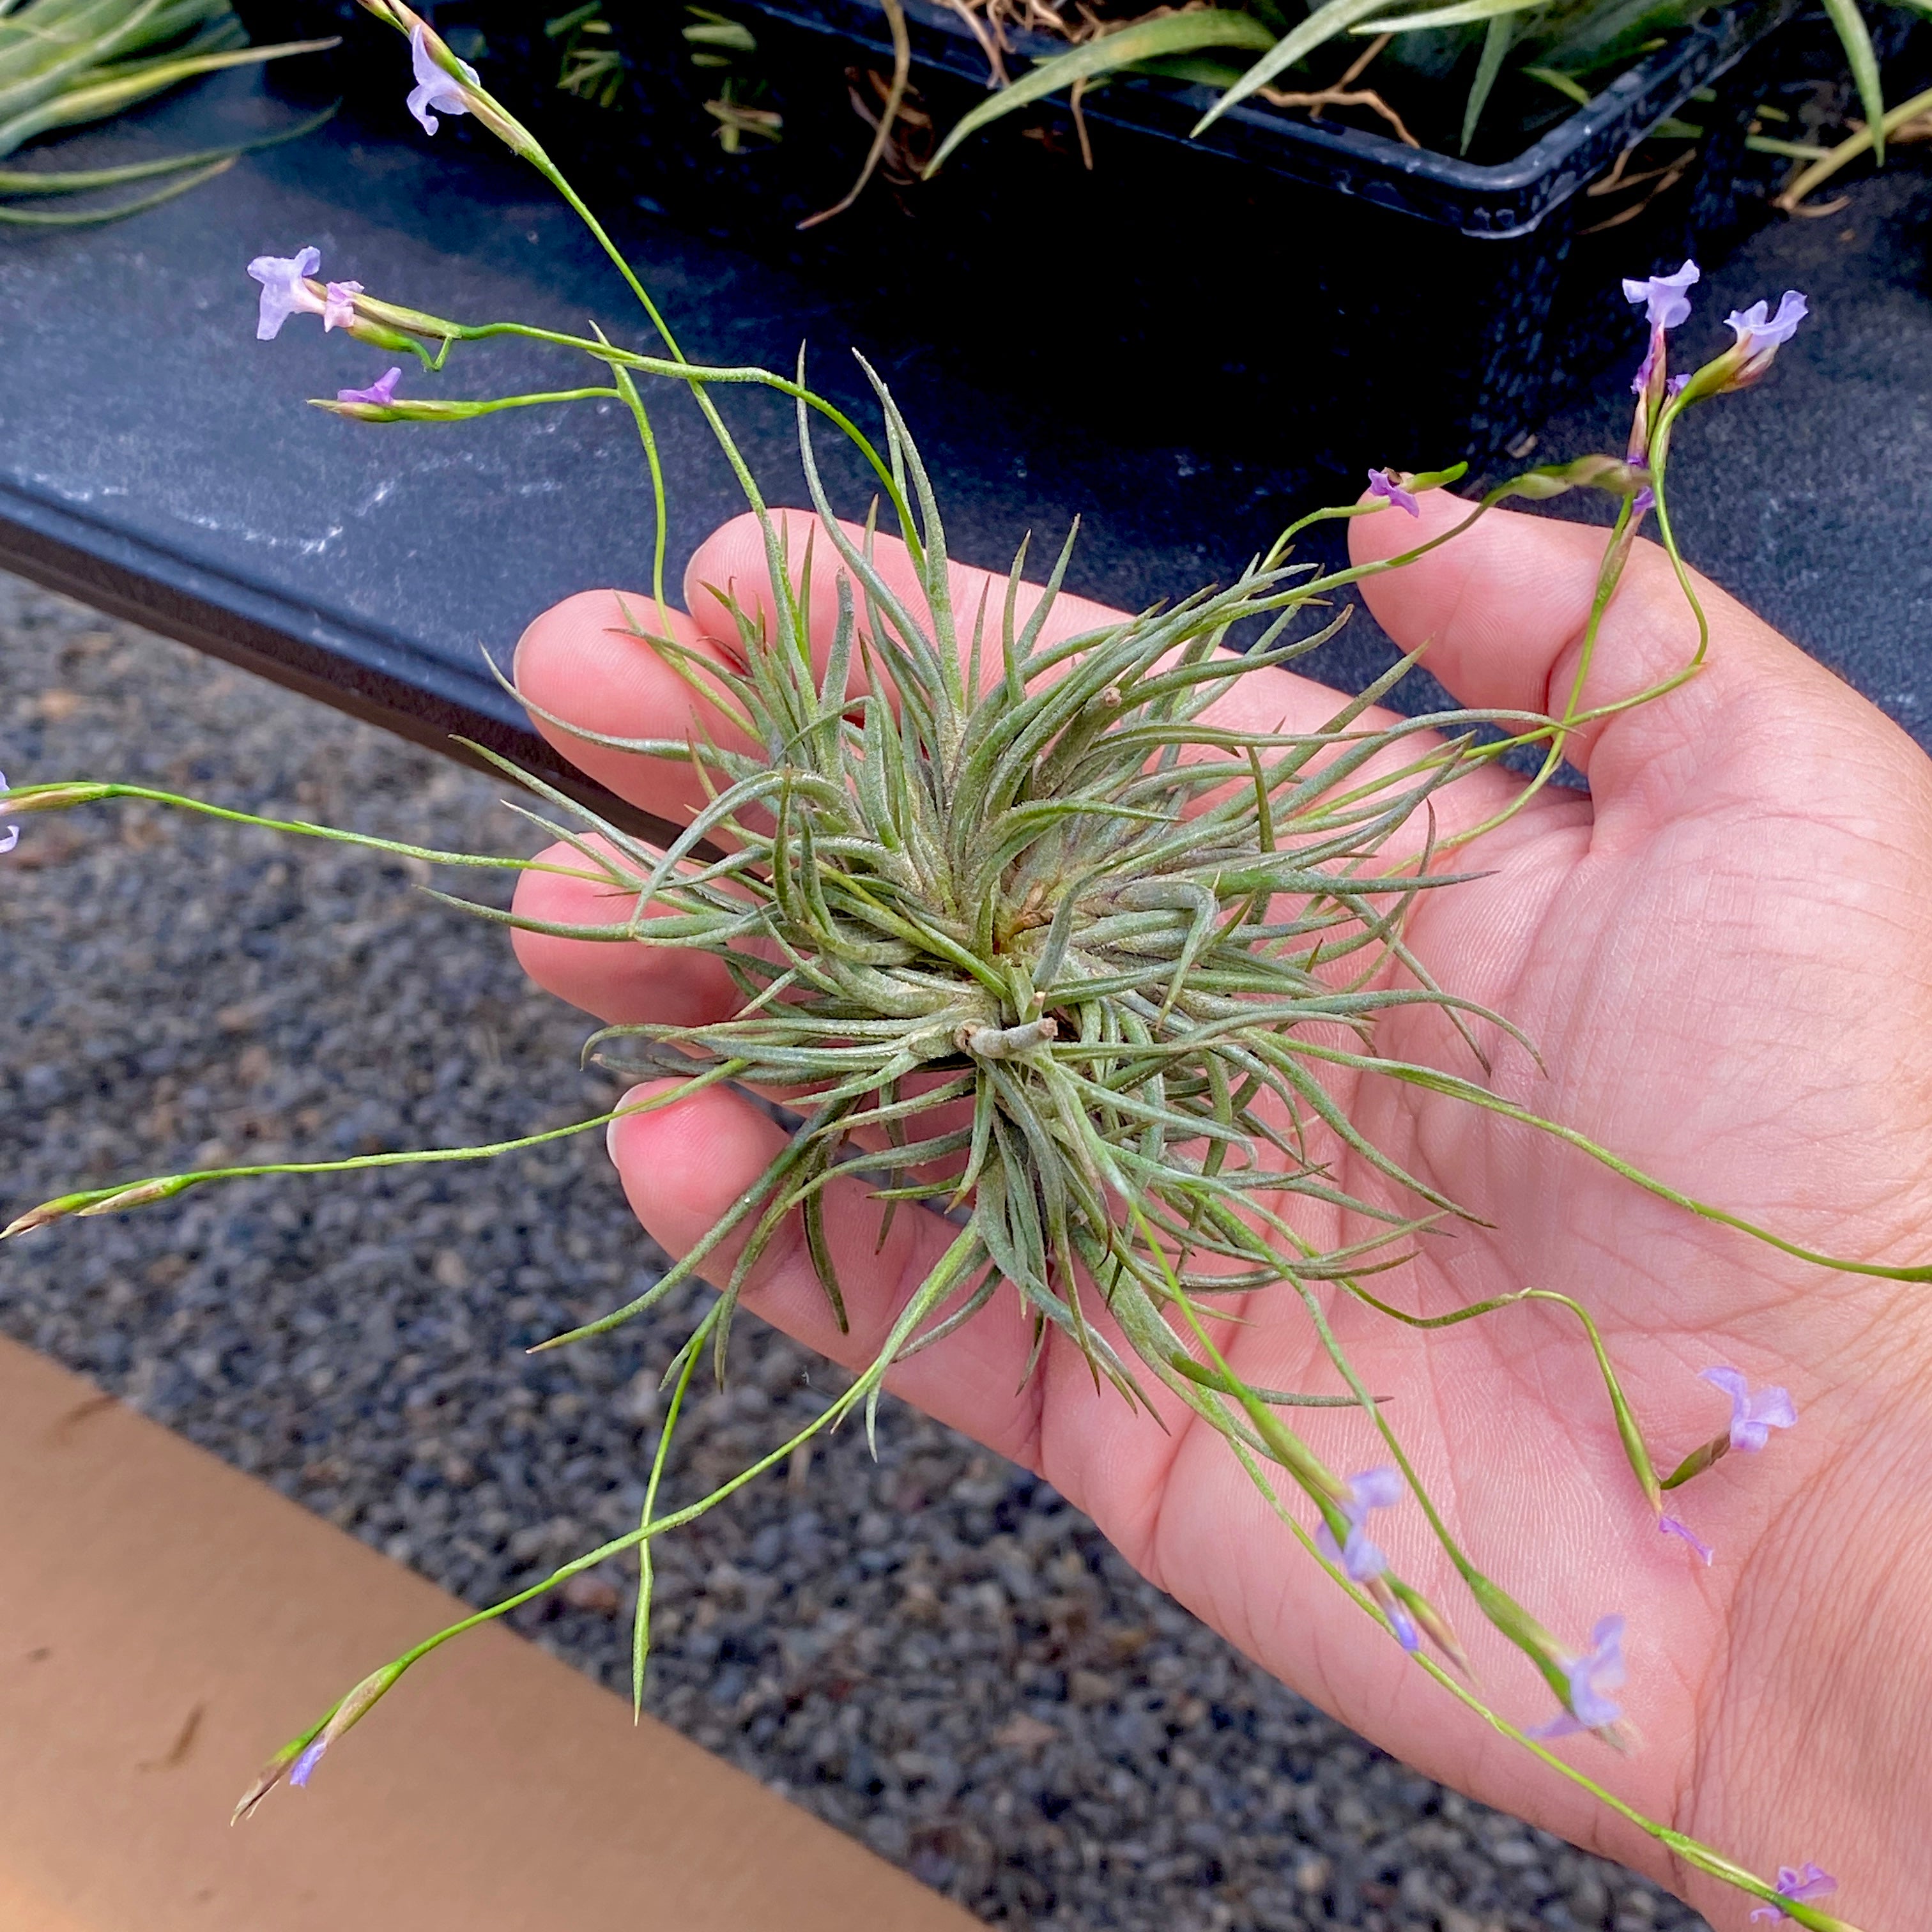 Tillandsia Bandensis Air Plant With Purple Flowers Being Held In Hand